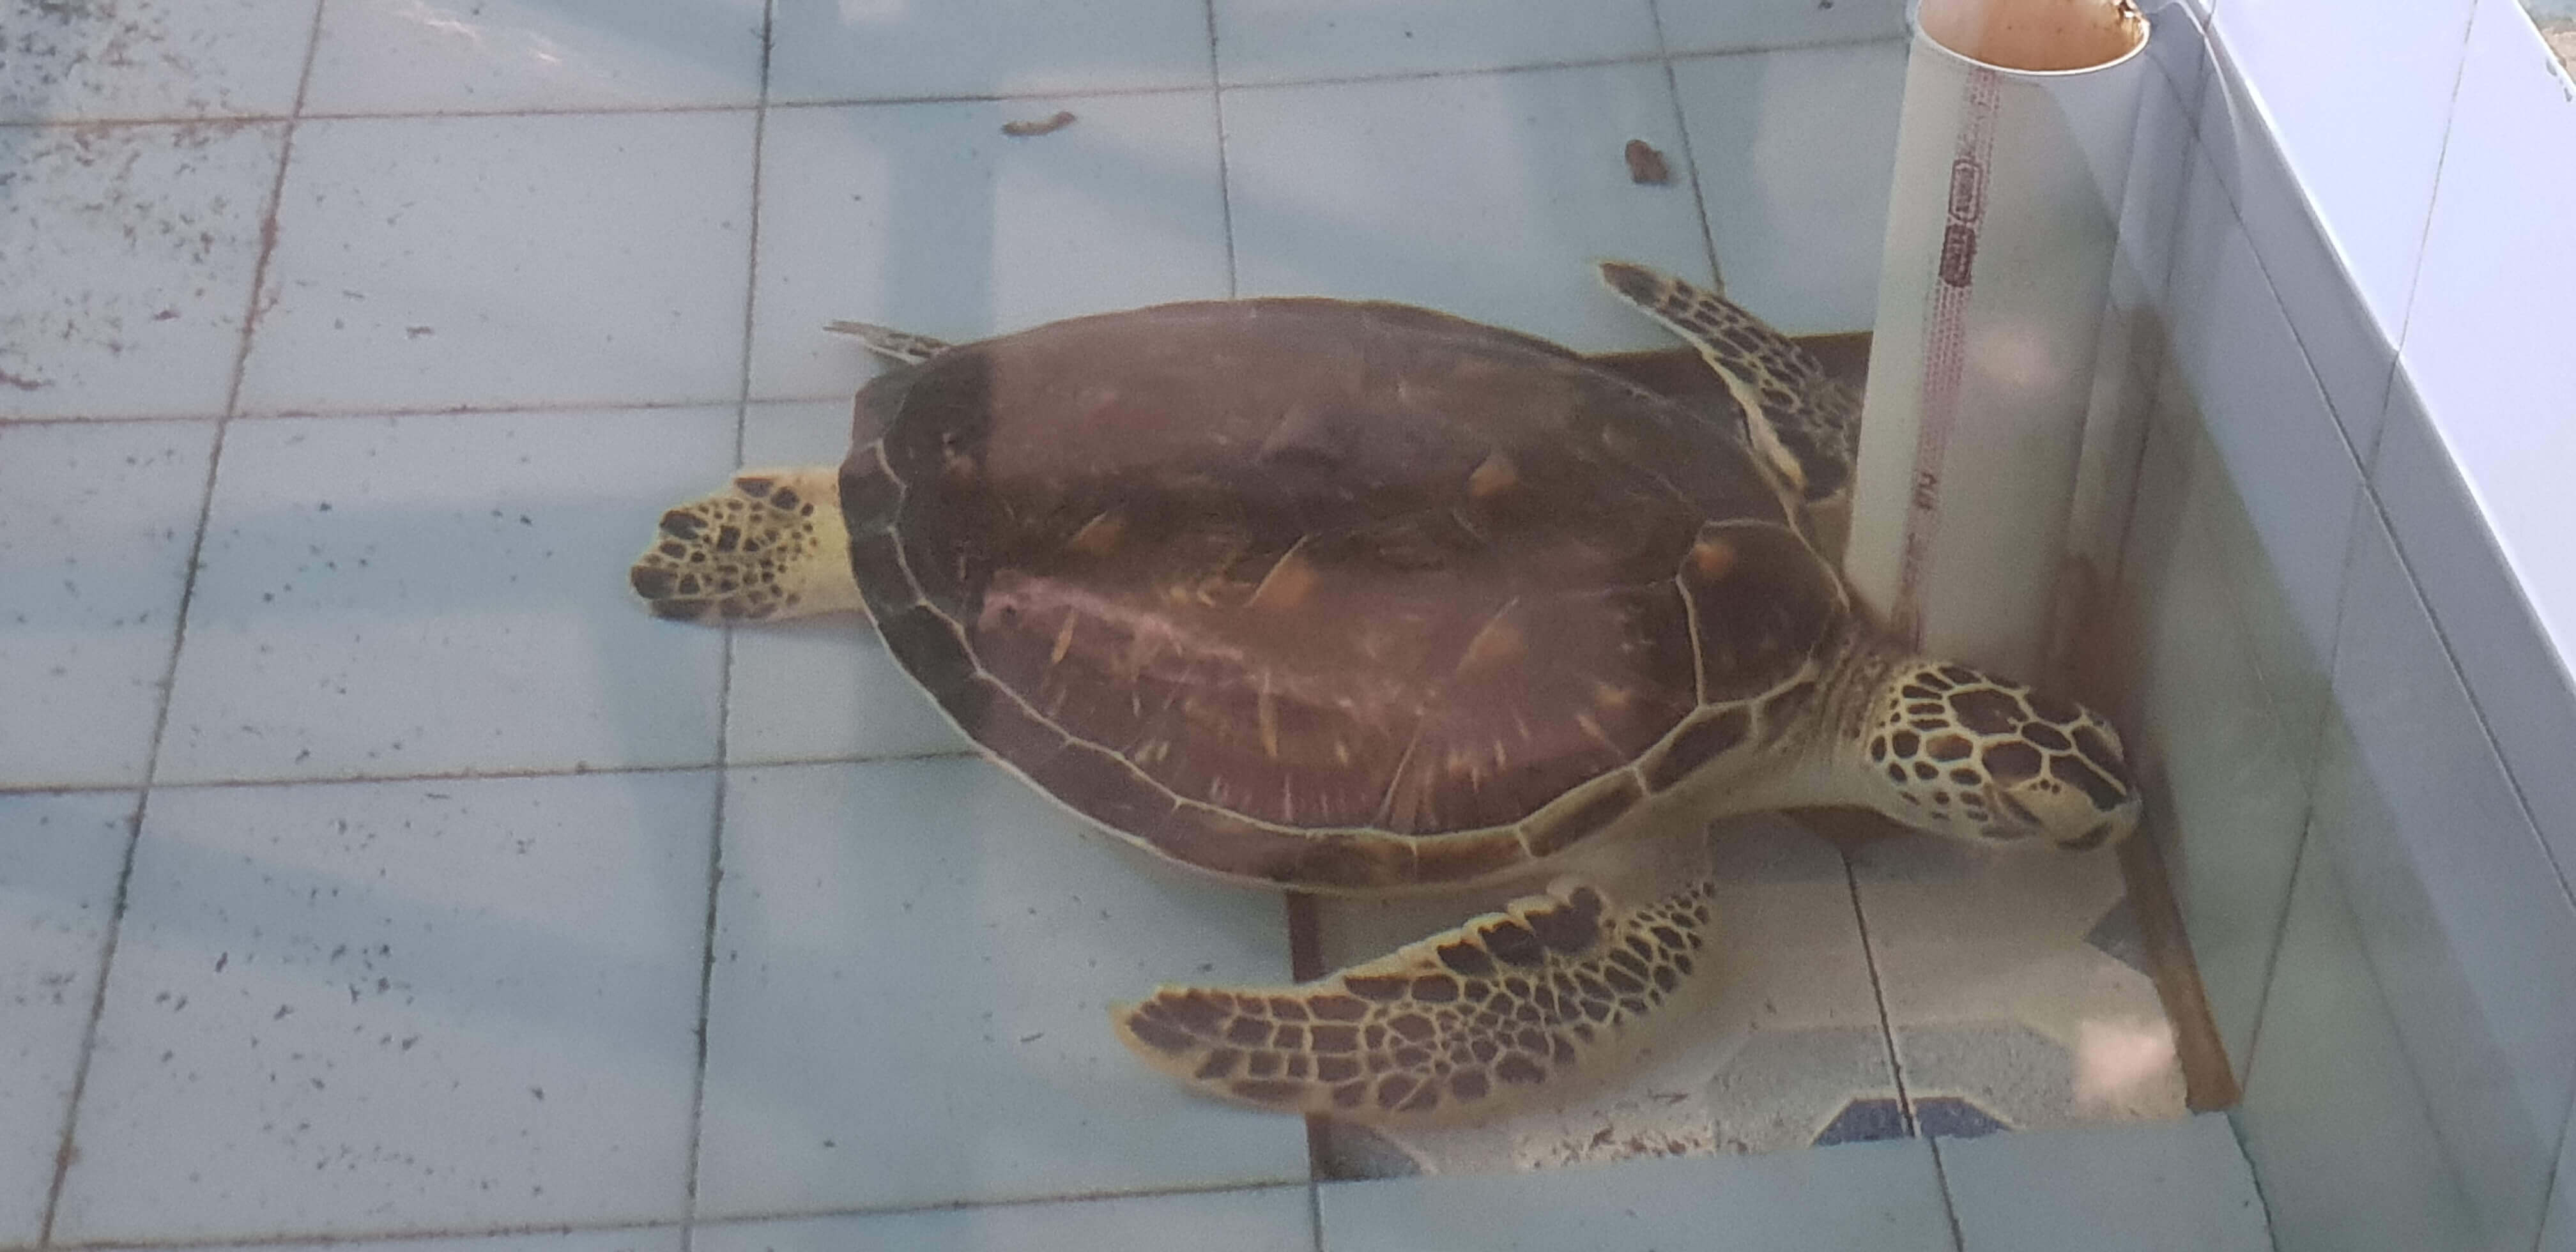 The place adopts injured turtles and takes care of them till they are released in the ocean